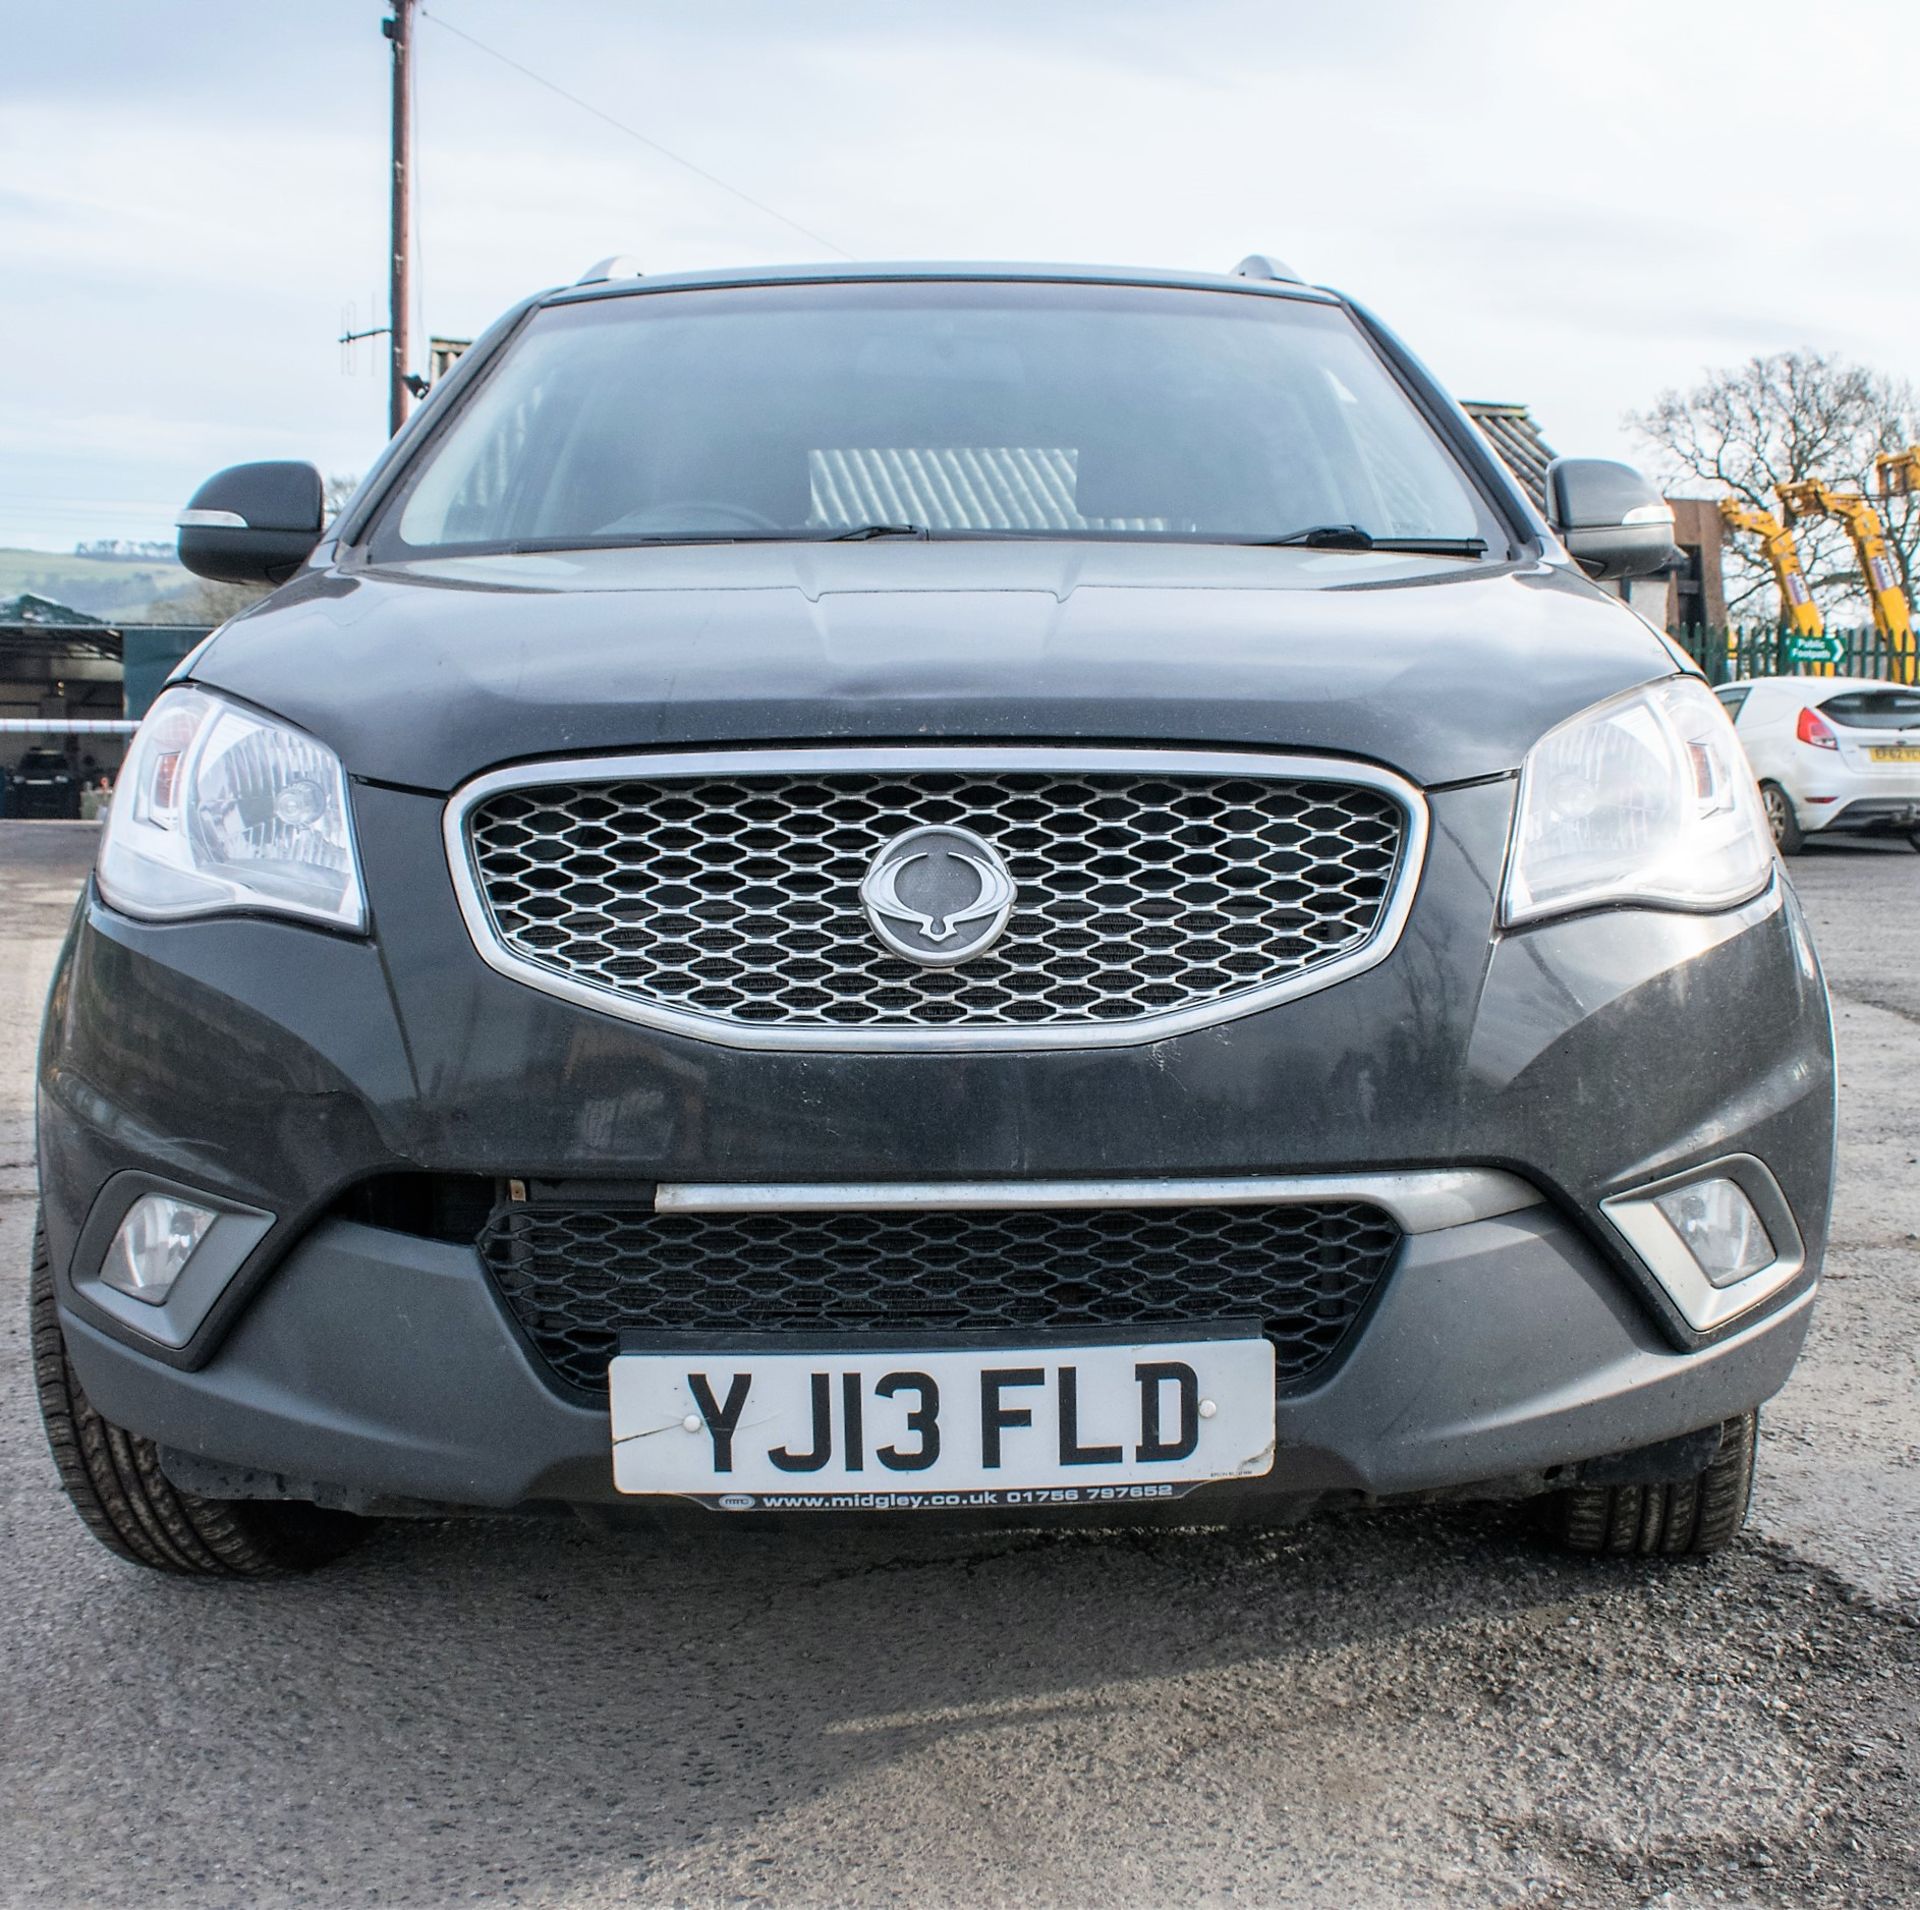 Ssangyong Korando CSX AWD light 4x4 utility good vehicle. Registration number: YJ13 FLD Date of - Image 5 of 22